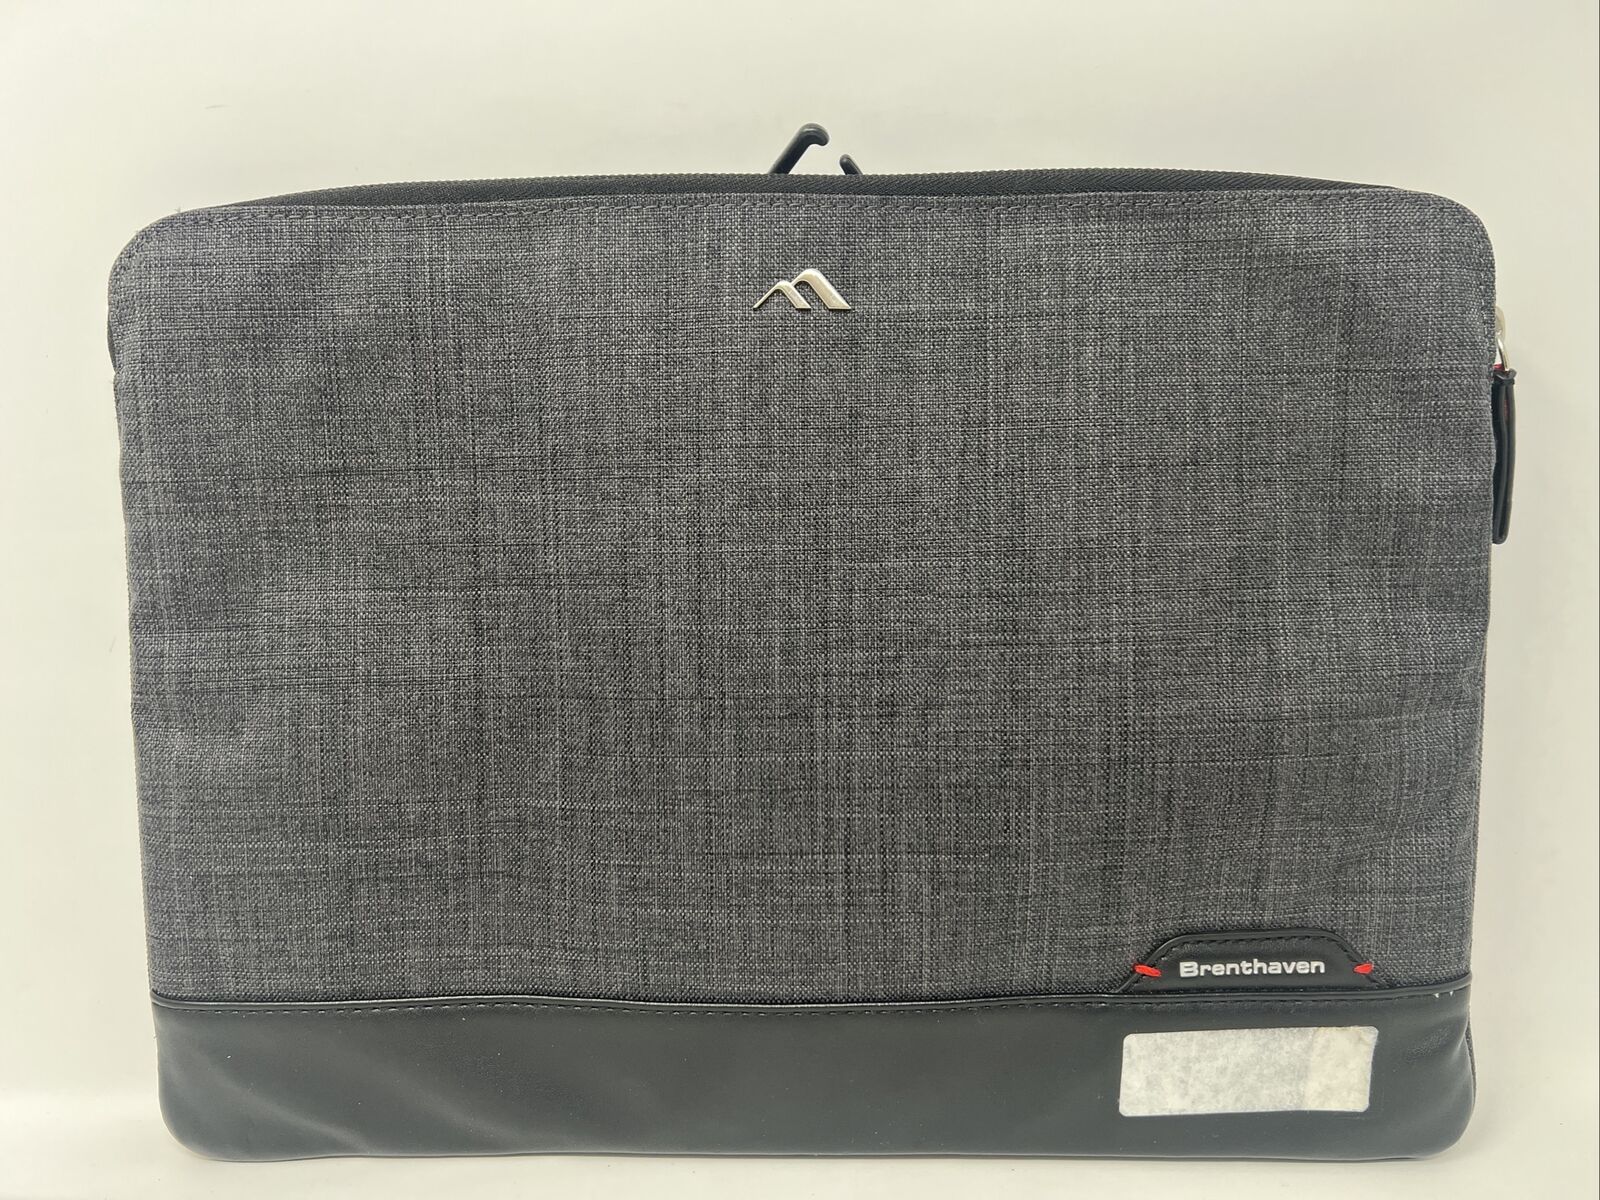 Brenthaven Collins 14”x10” Tablet sleeve Charcoal